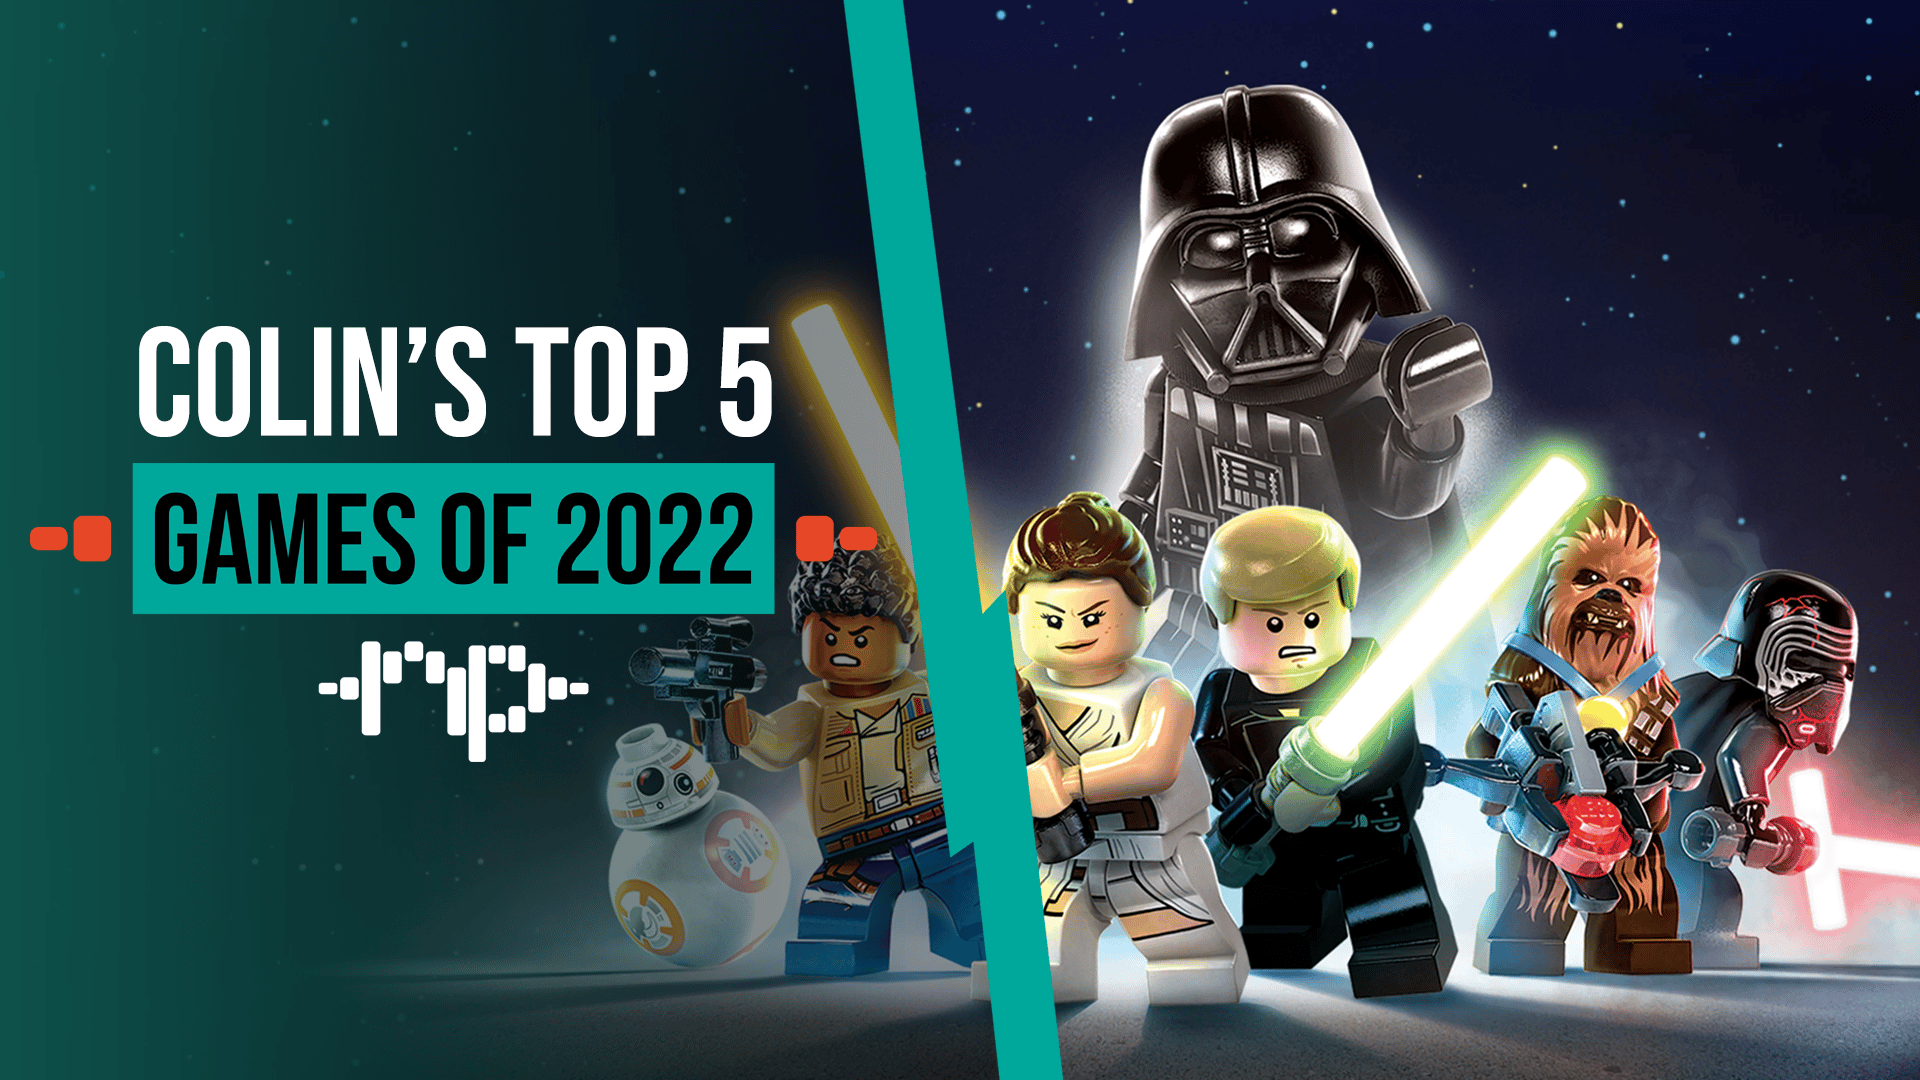 Best Games of 2022: Colin’s Top 5 Games of 2022